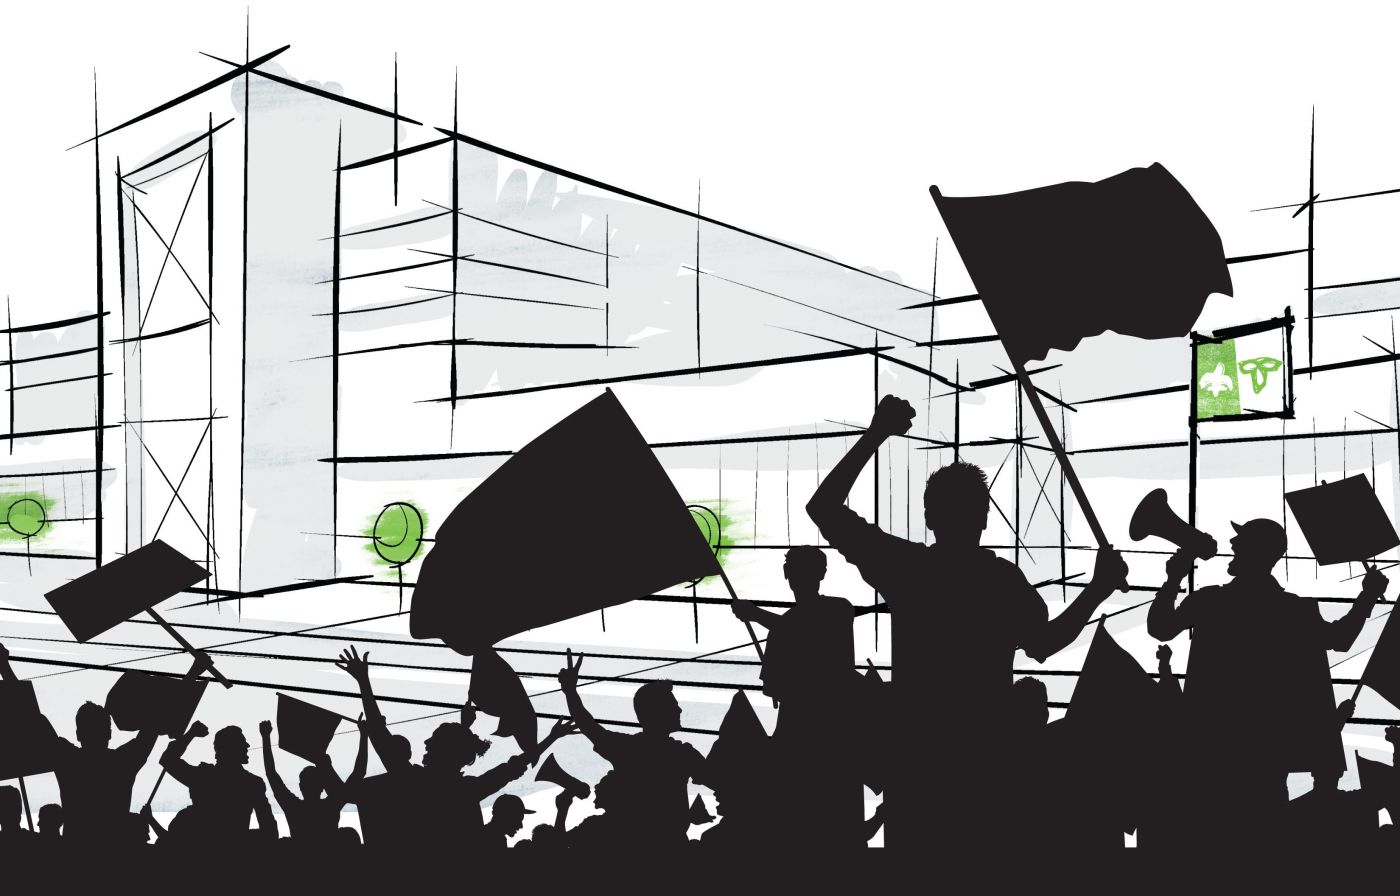 Colour drawing of a crowd demonstrating with flags, placards and megaphones. The figures, seen from behind, appear in black silhouette in front of a stylized building with a Franco-Ontarian flag and balloons in green.